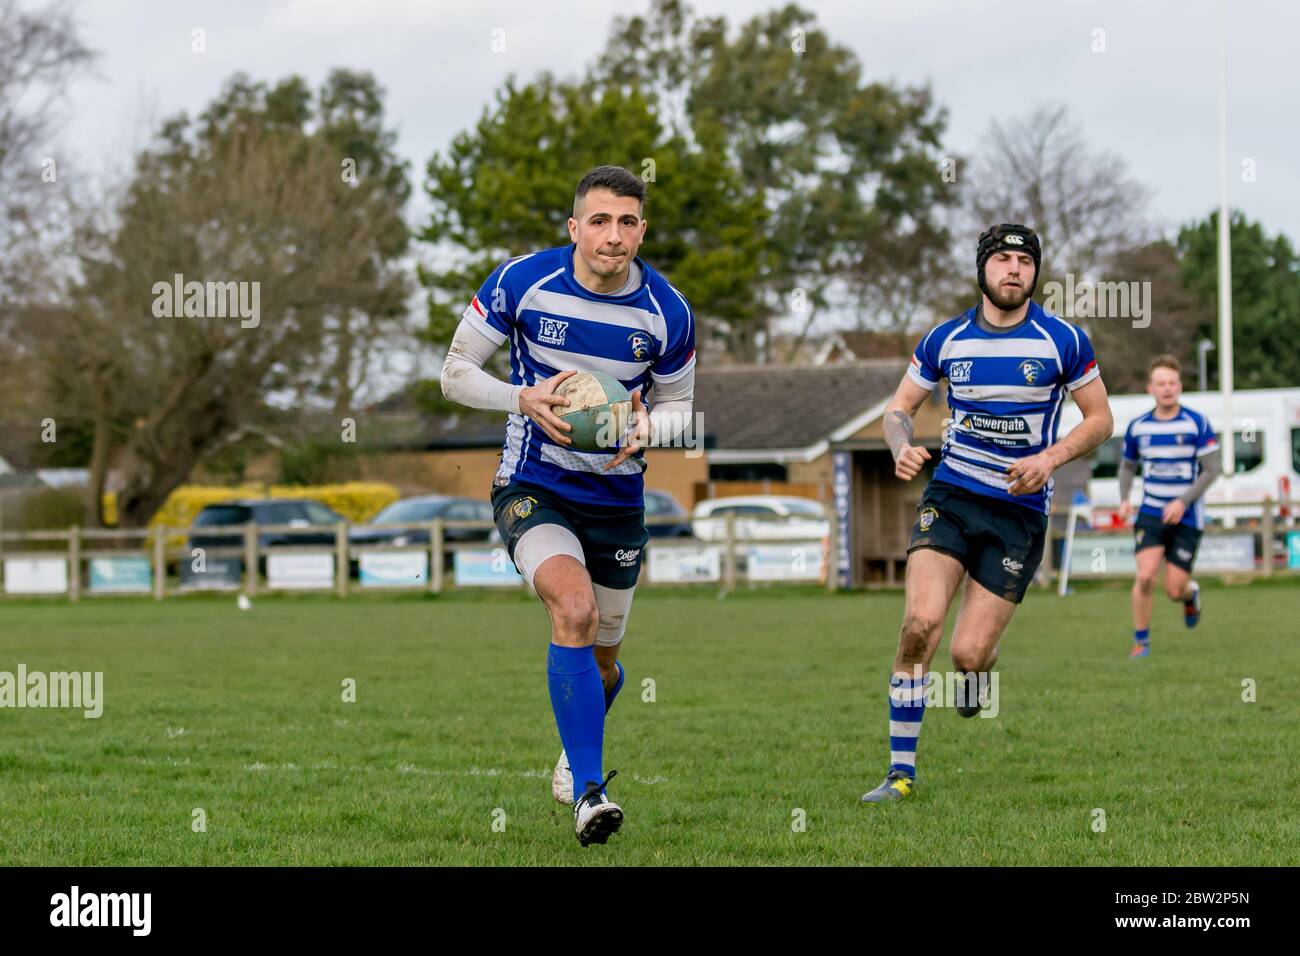 Rugby player runs towards the camera with the ball in two hands with teammate running to the side. Eastern Counties rugby union match at Lowestoft Stock Photo